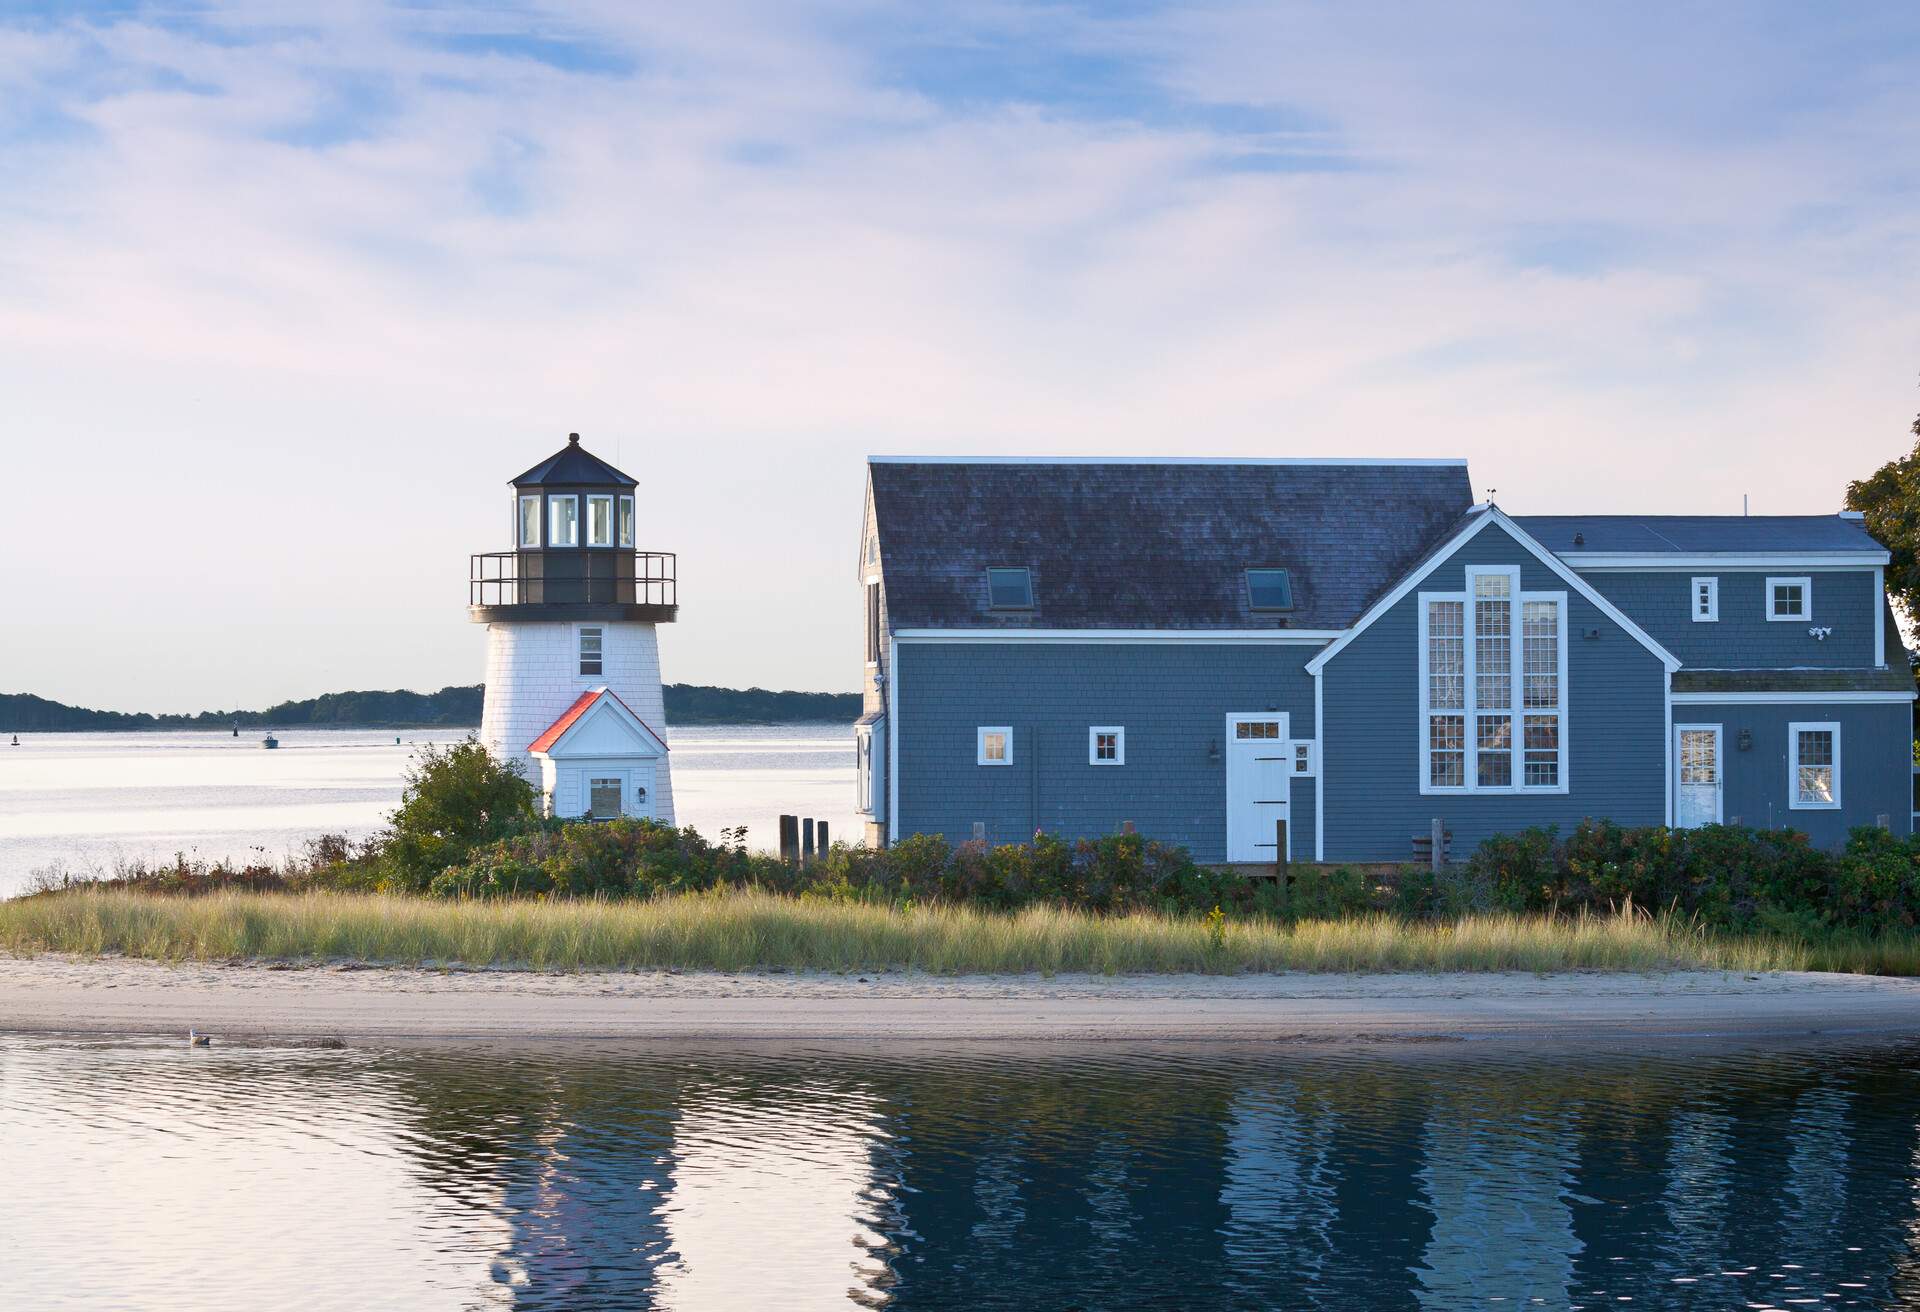 Lewis Bay Lighthouse, Hyannis, Cape Cod, Massachusetts, USA